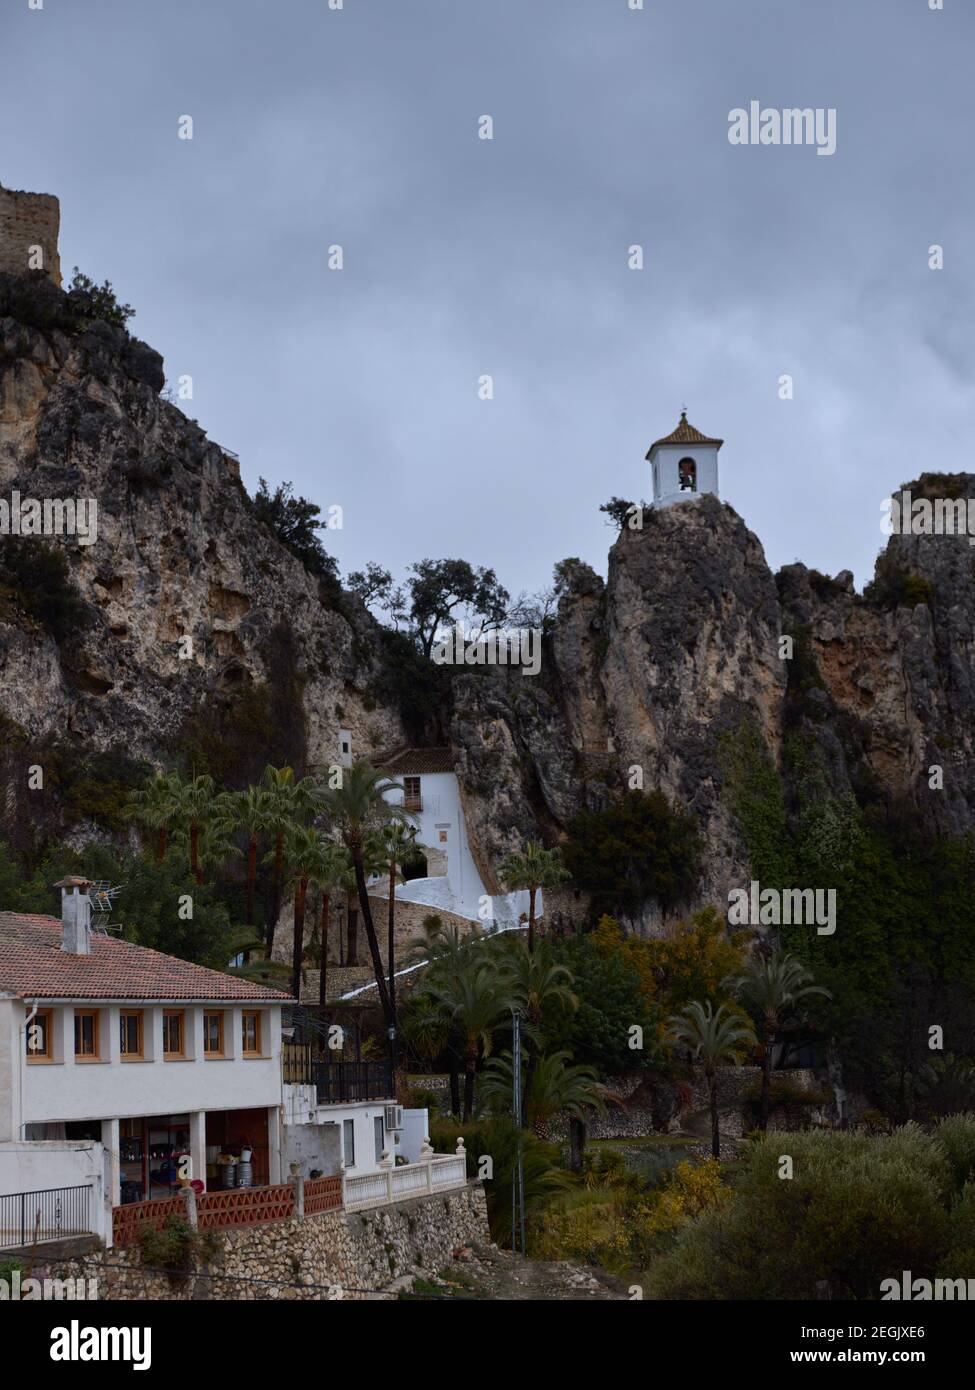 religious chapel on top of a mountain, belonging to the castle of Guadalest in the province of Alicante, Spain. scenery surrounded by palm trees Stock Photo